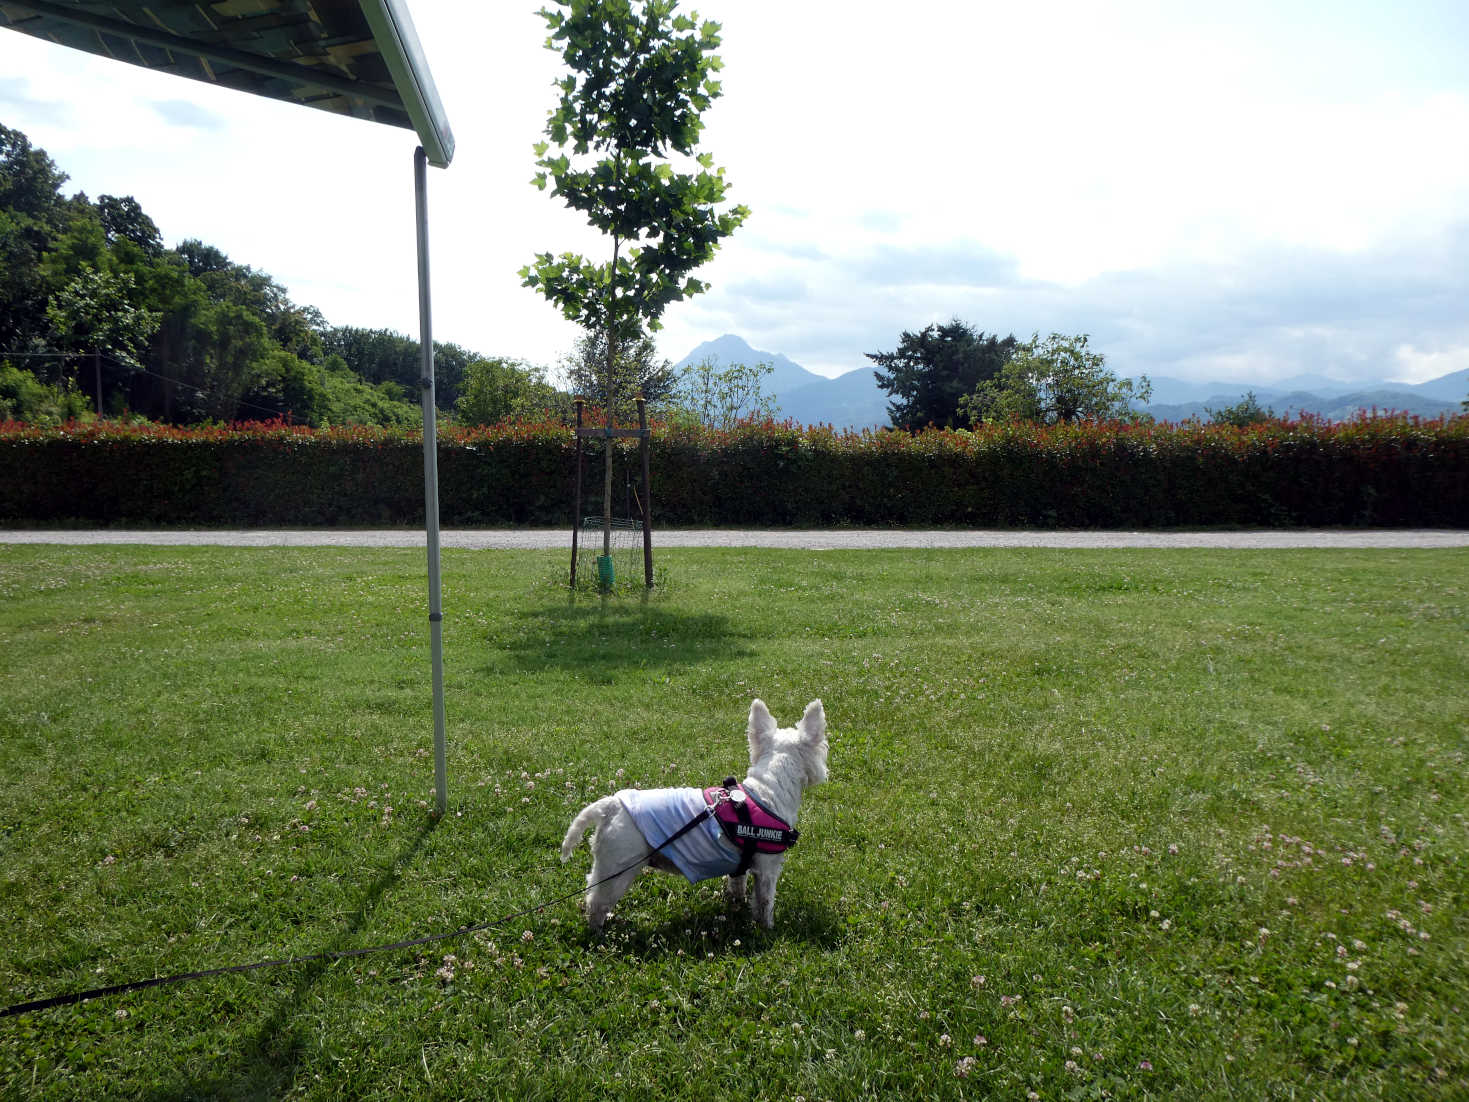 Poppy the westie at camp in Barga